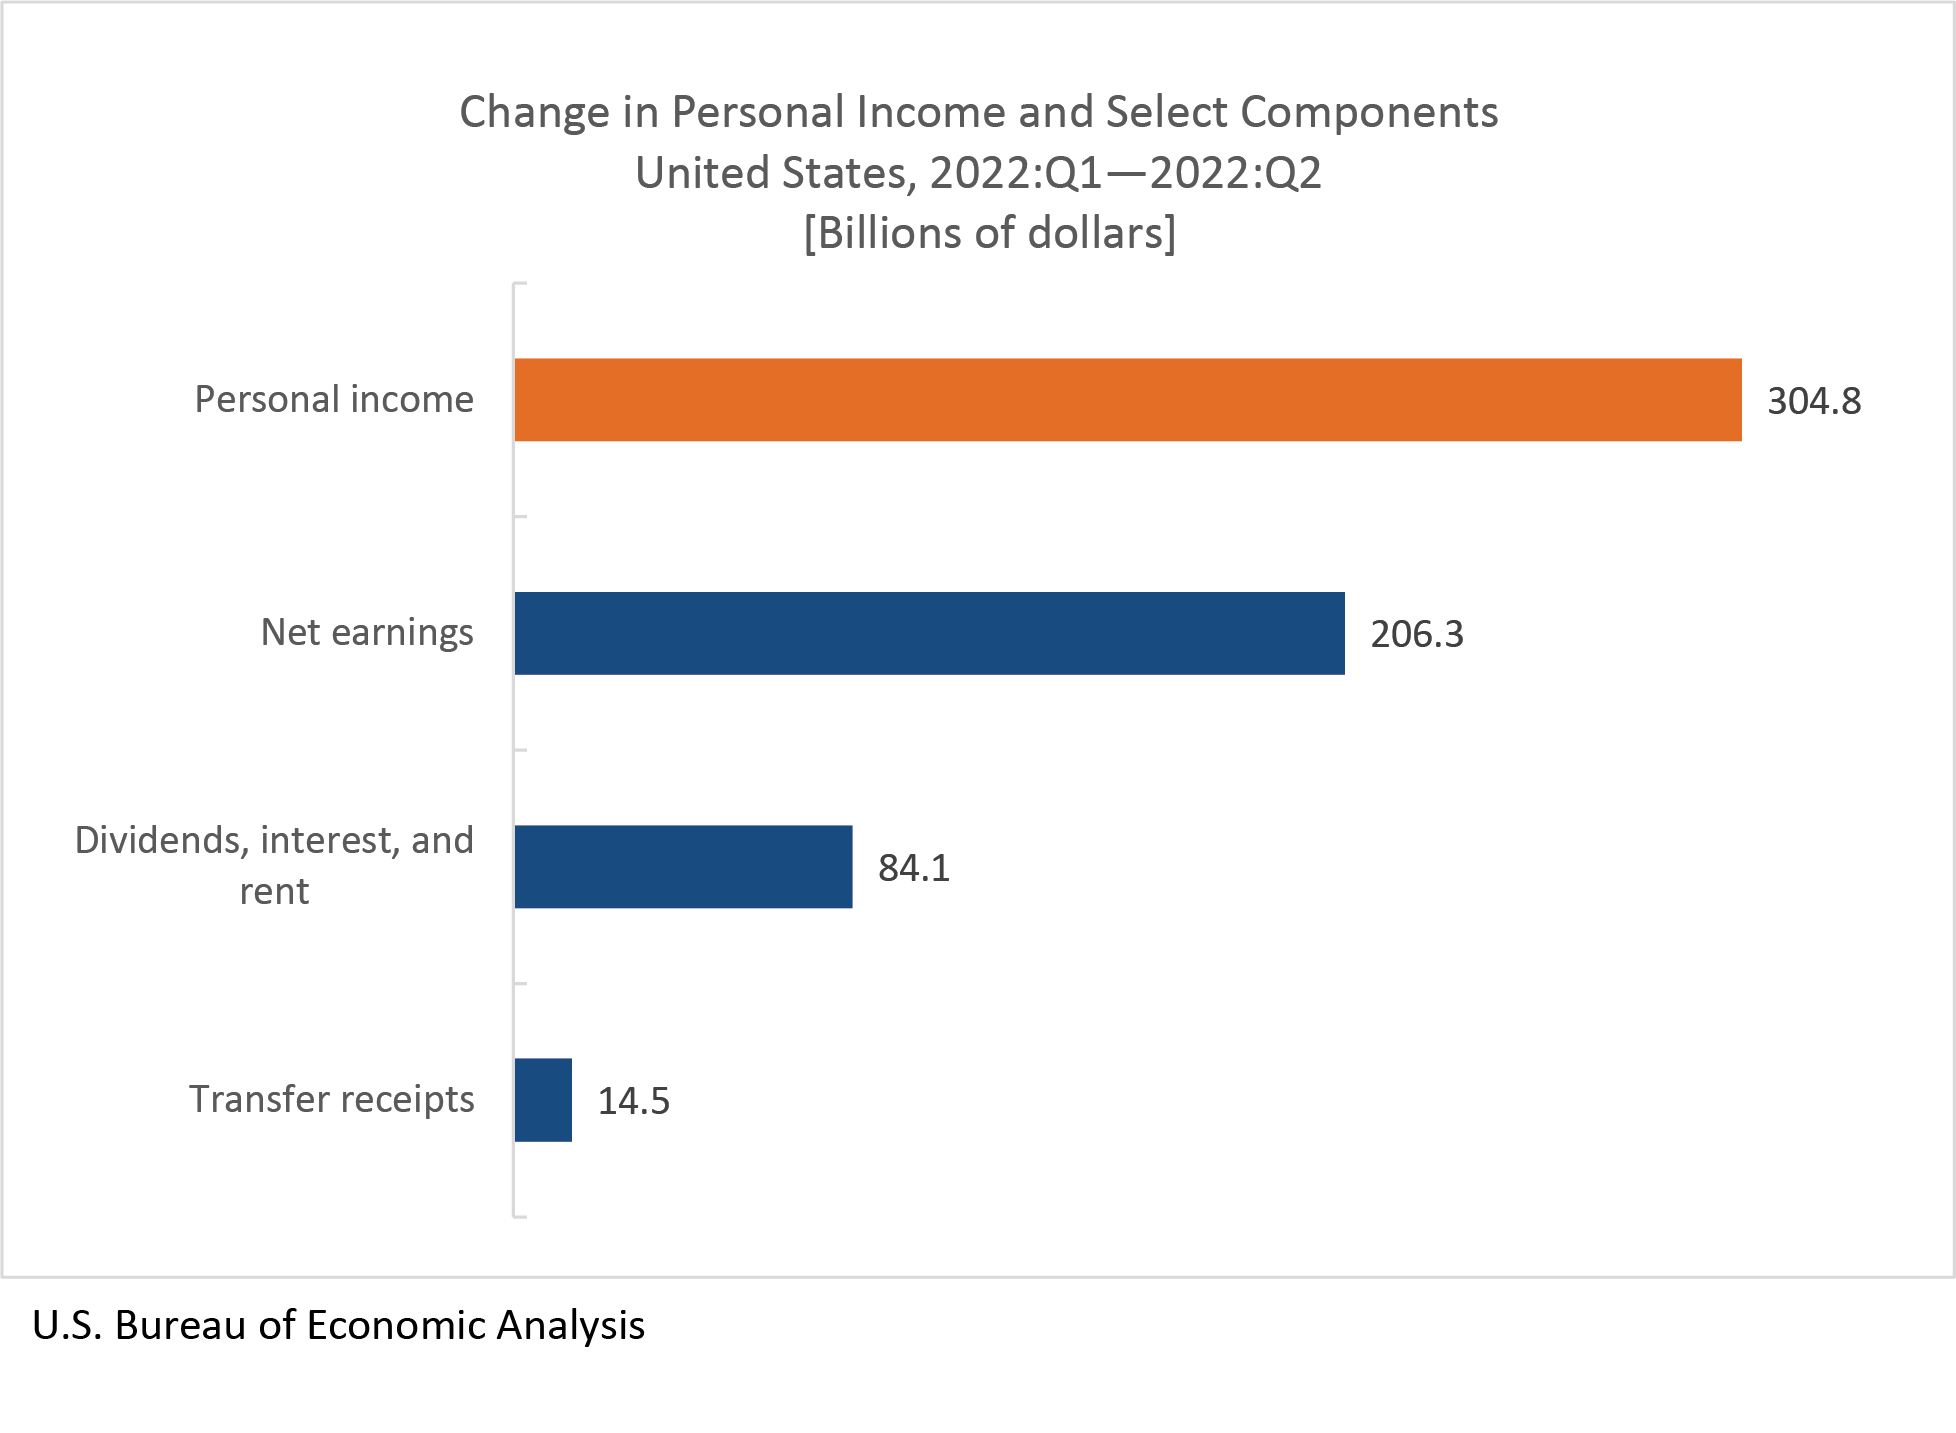 Changes in Personal Income and Select Components: United States, 2022:Q1-2022:Q2